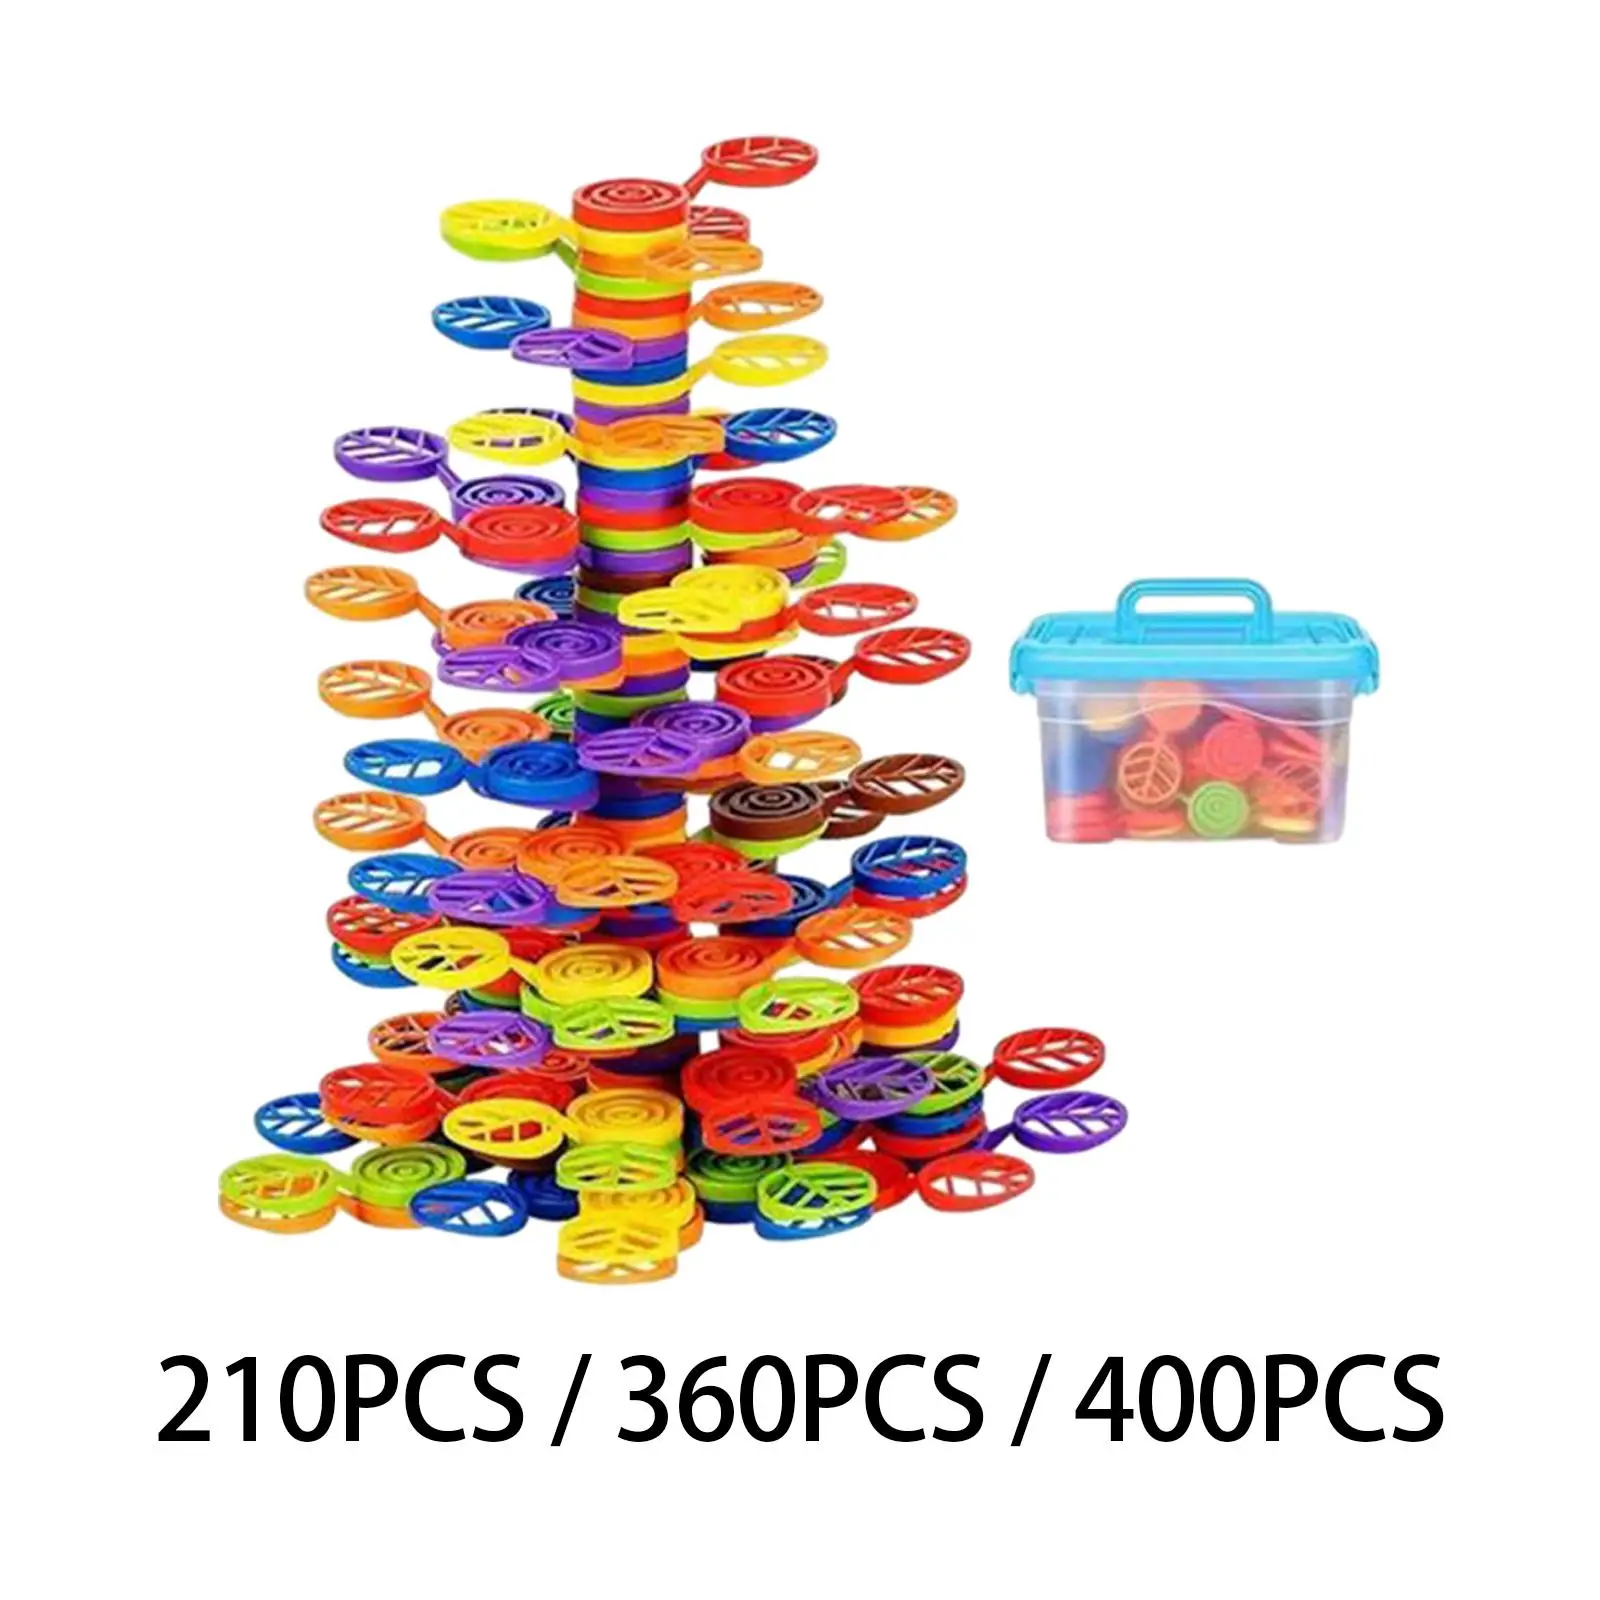 Stacking Toys Early Learning Montessori Sensory Color Sorting Montessori Toys for Kids Girls Boys Age 4 5 6 Holiday Gifts